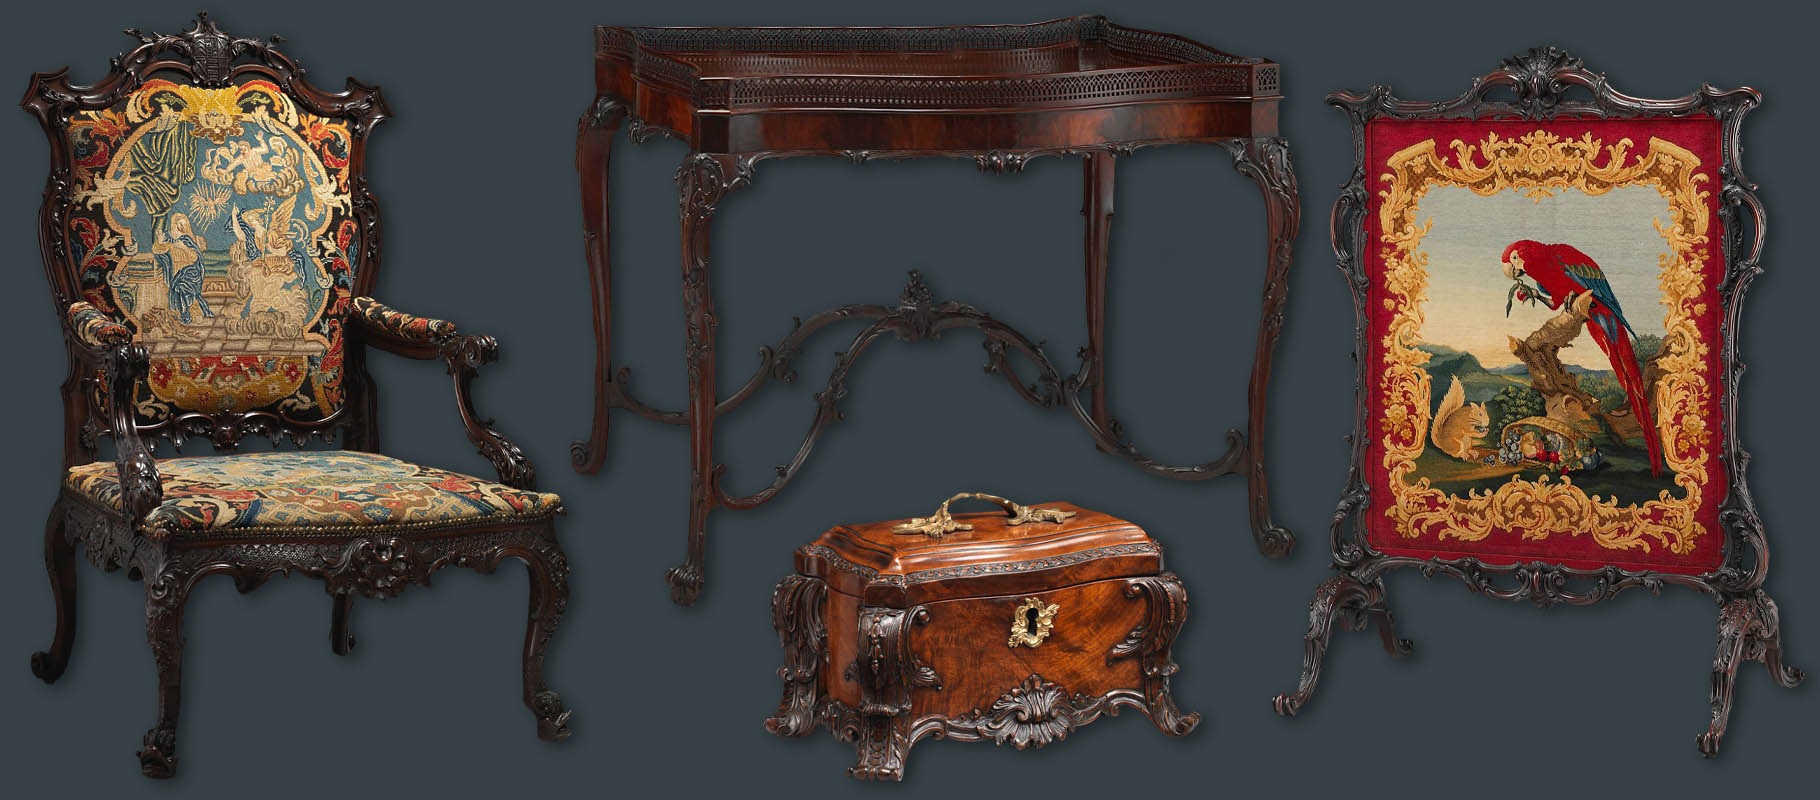 Antique Furniture Terminology You Should Know